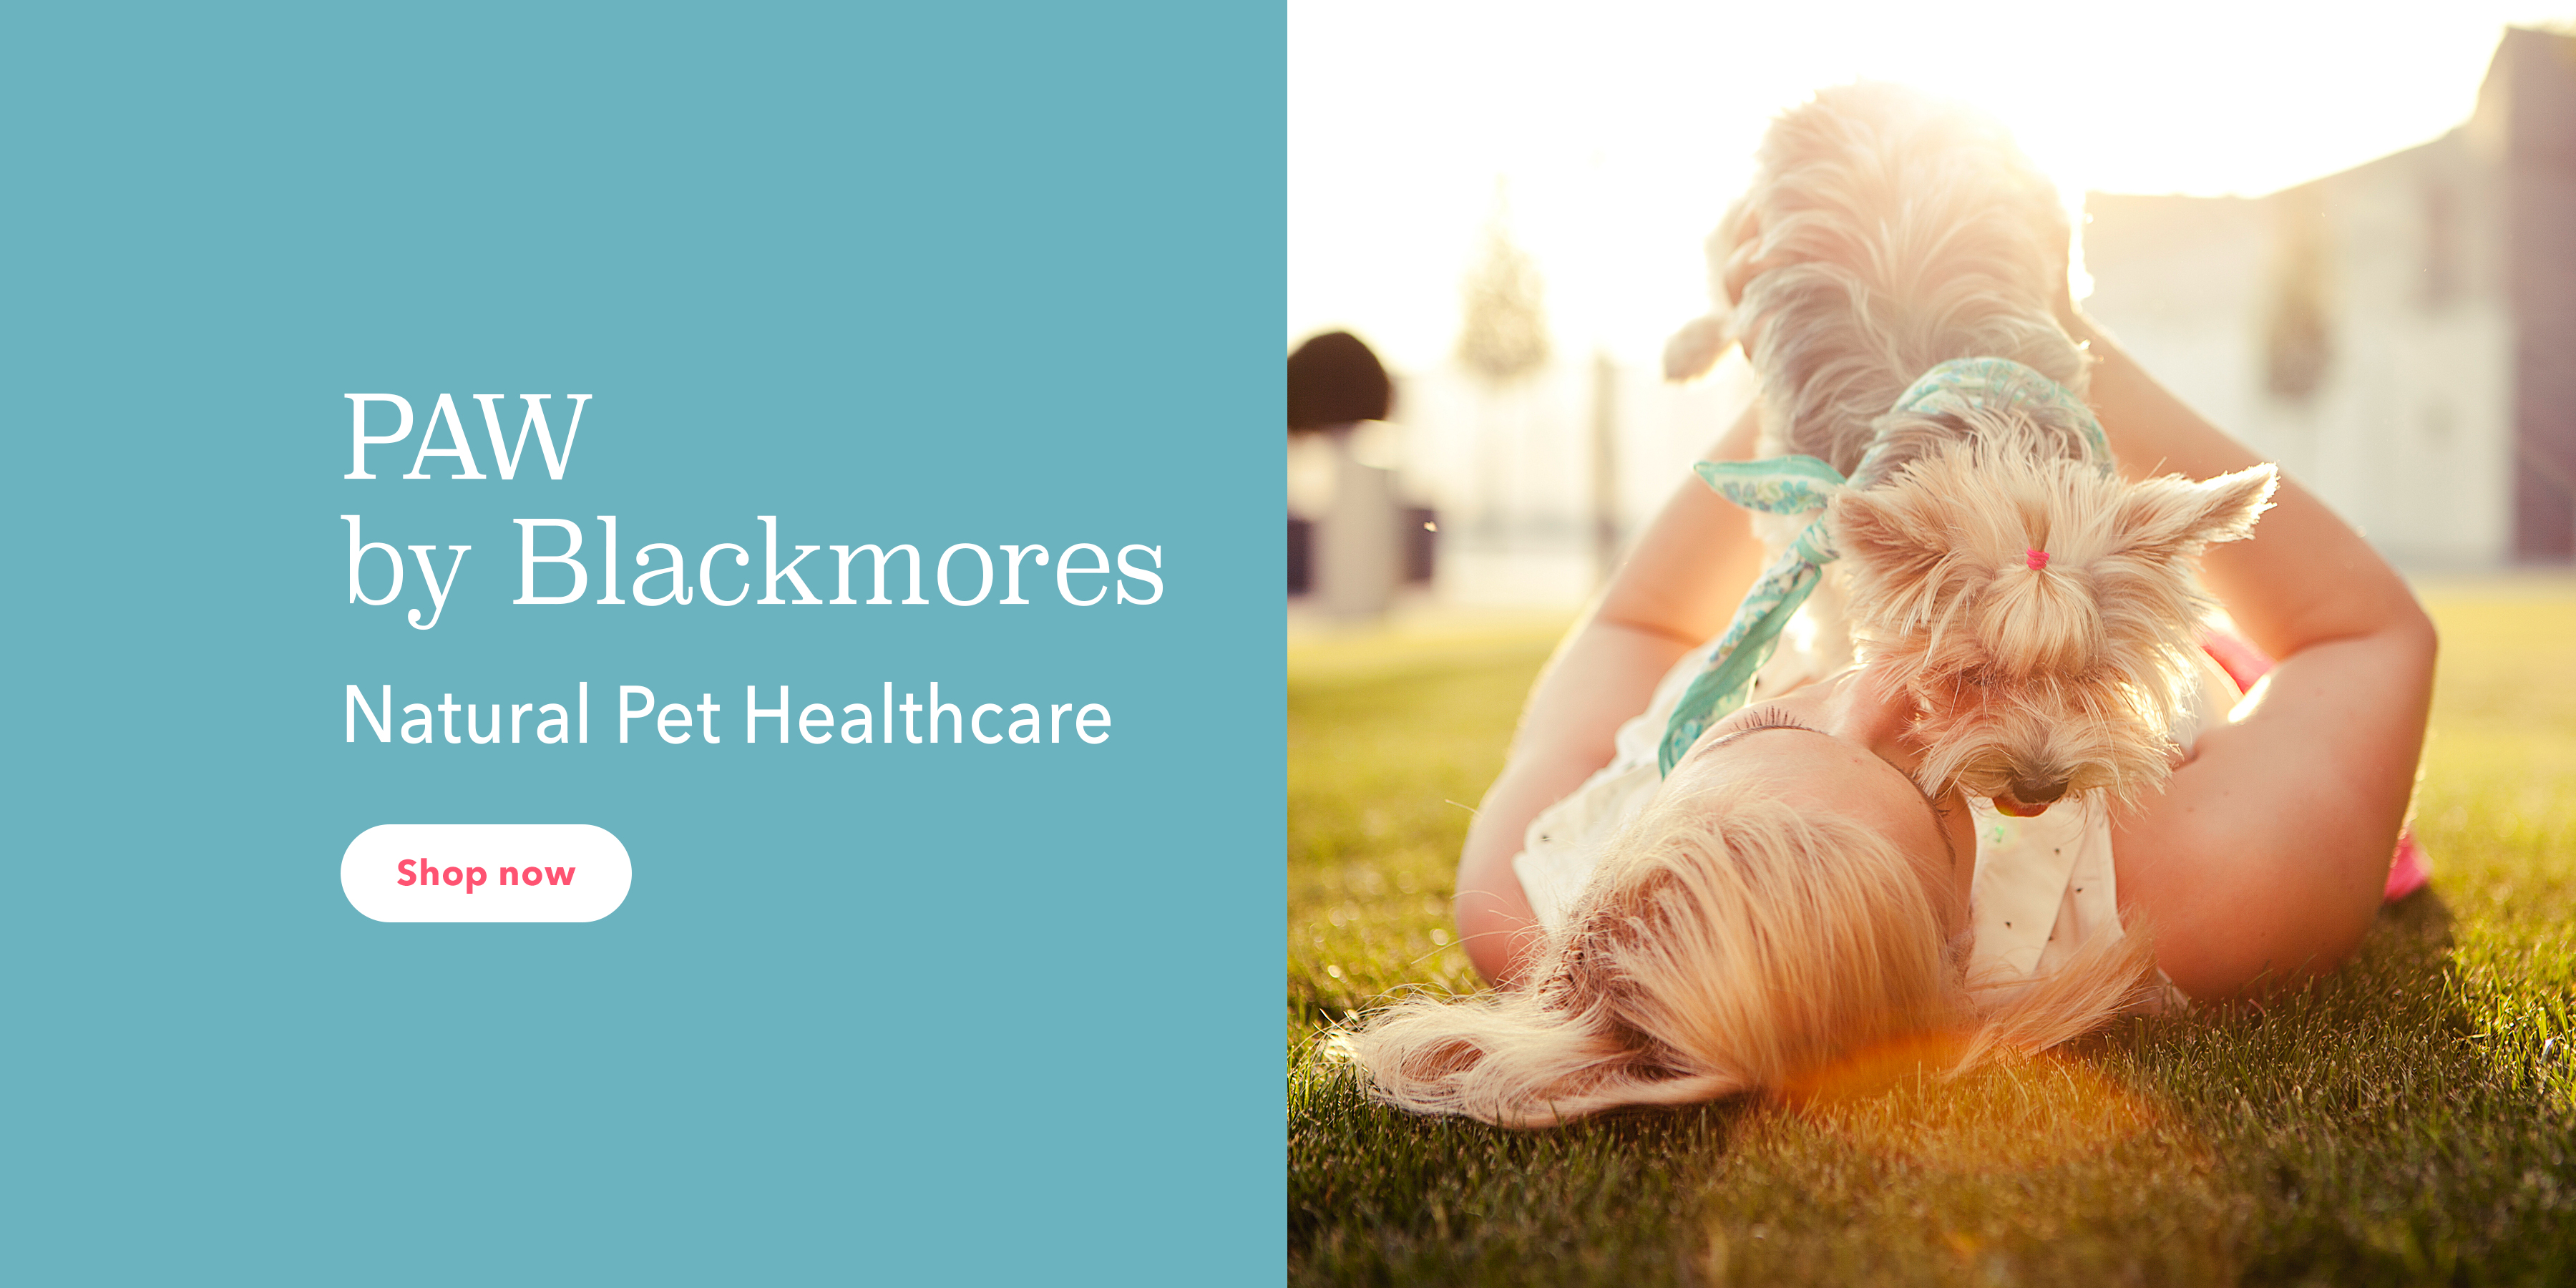 PAW By Blackmores Natural Pet Healthcare